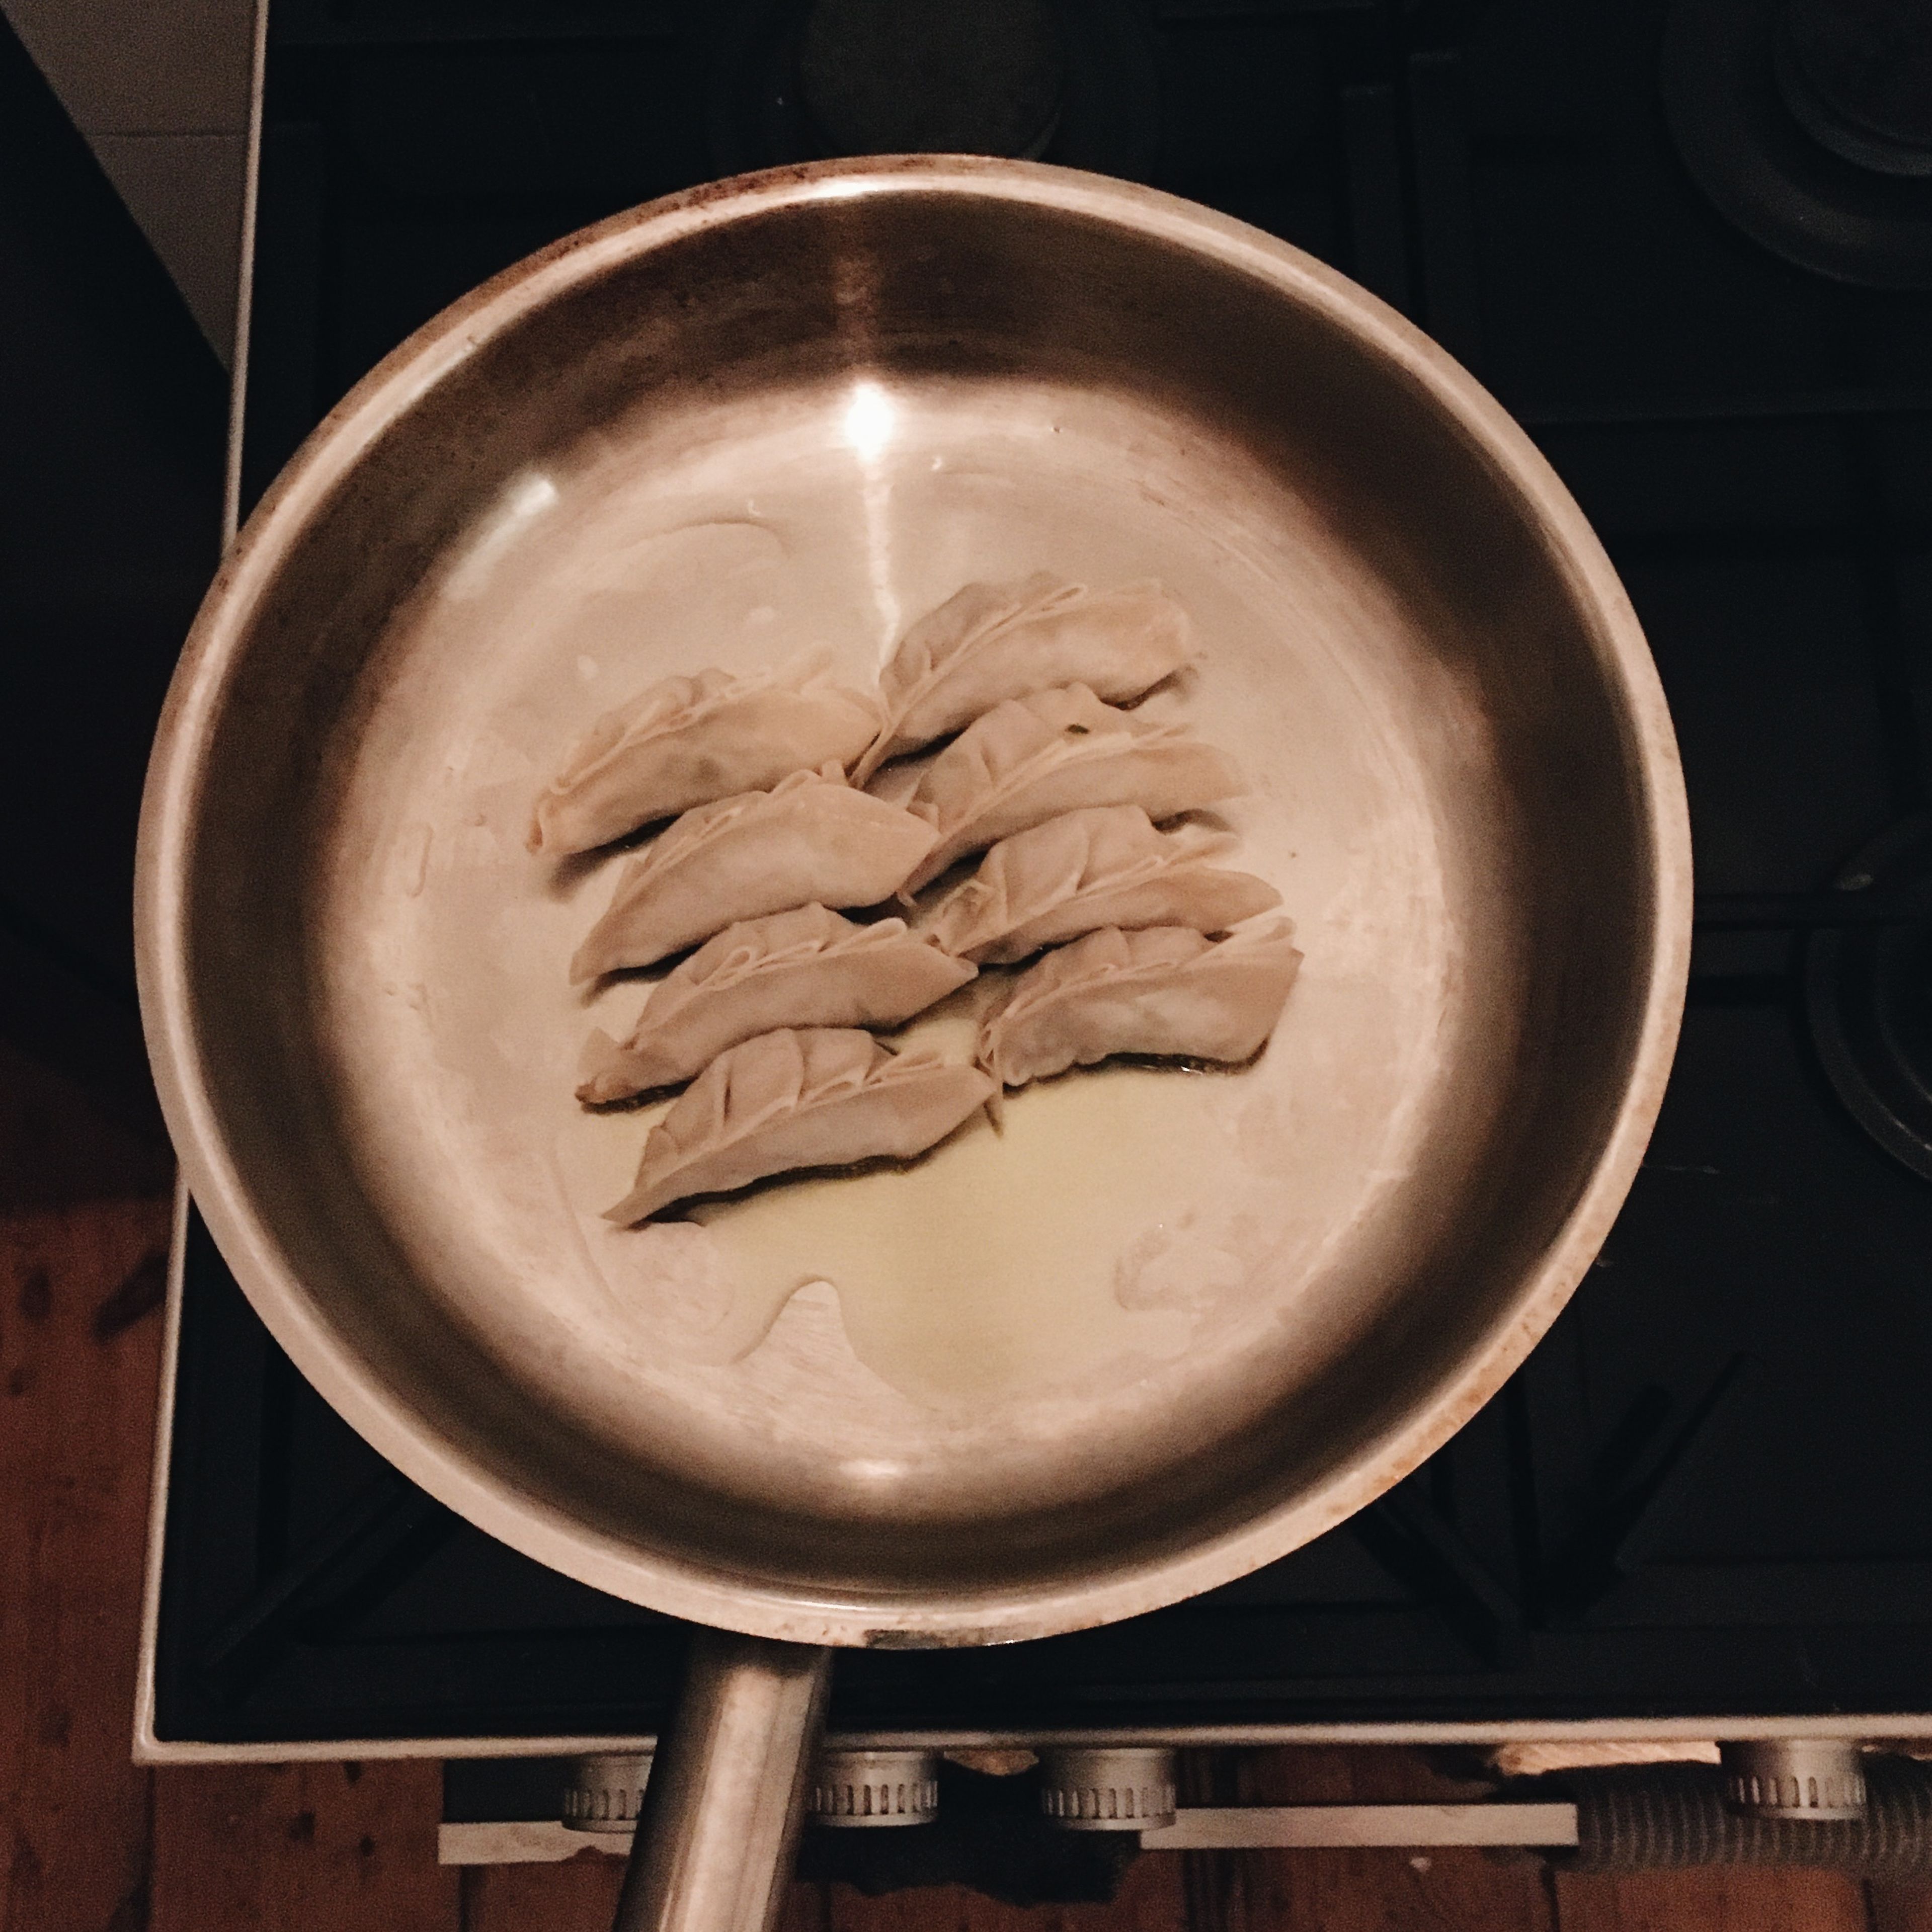 Heat oil in a large frying pan. Once heated, place the gyoza in a single layer, in two rows. Cook until the bottom of the gyoza is lightly golden, roughly 3 min.